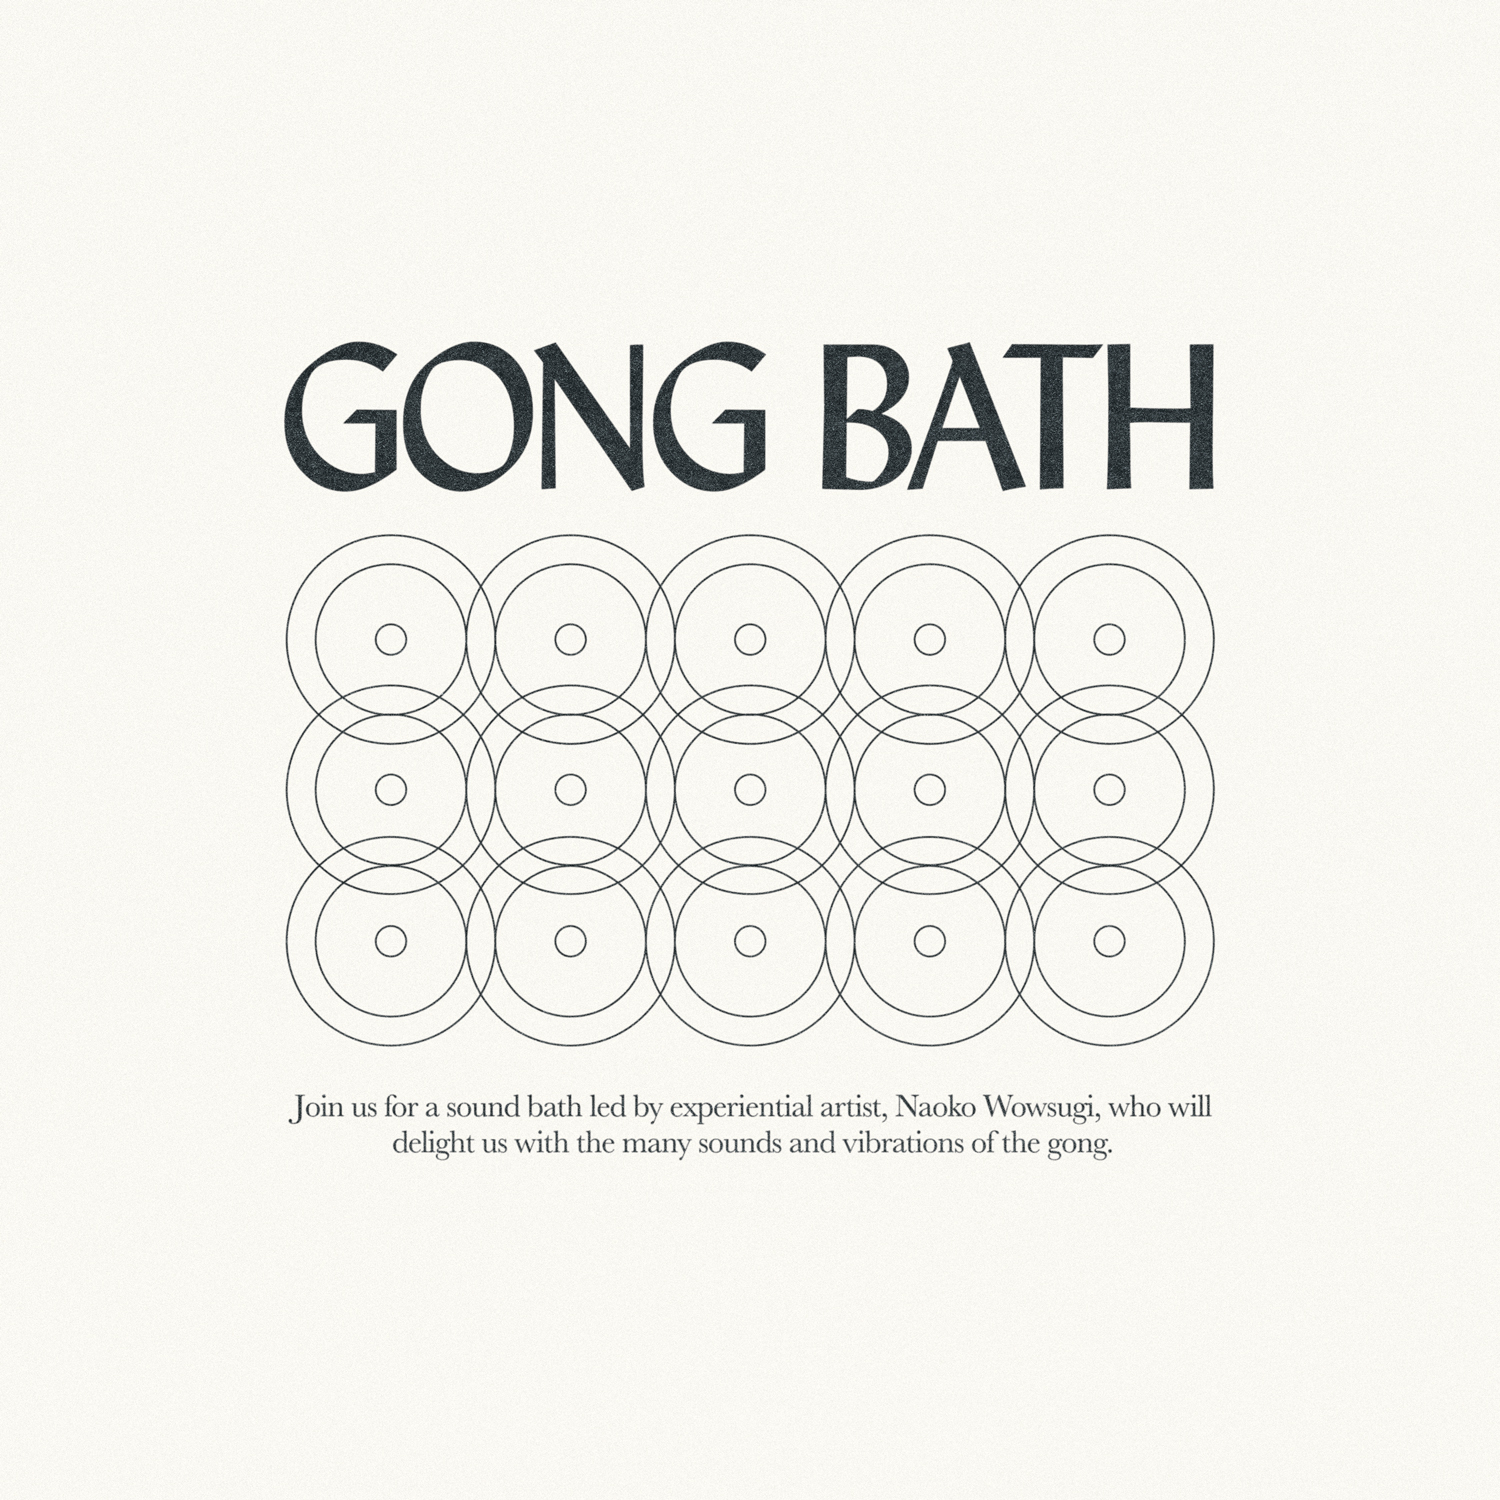 "GONG BATH" are written in black ink with some designs on a light grey surface.